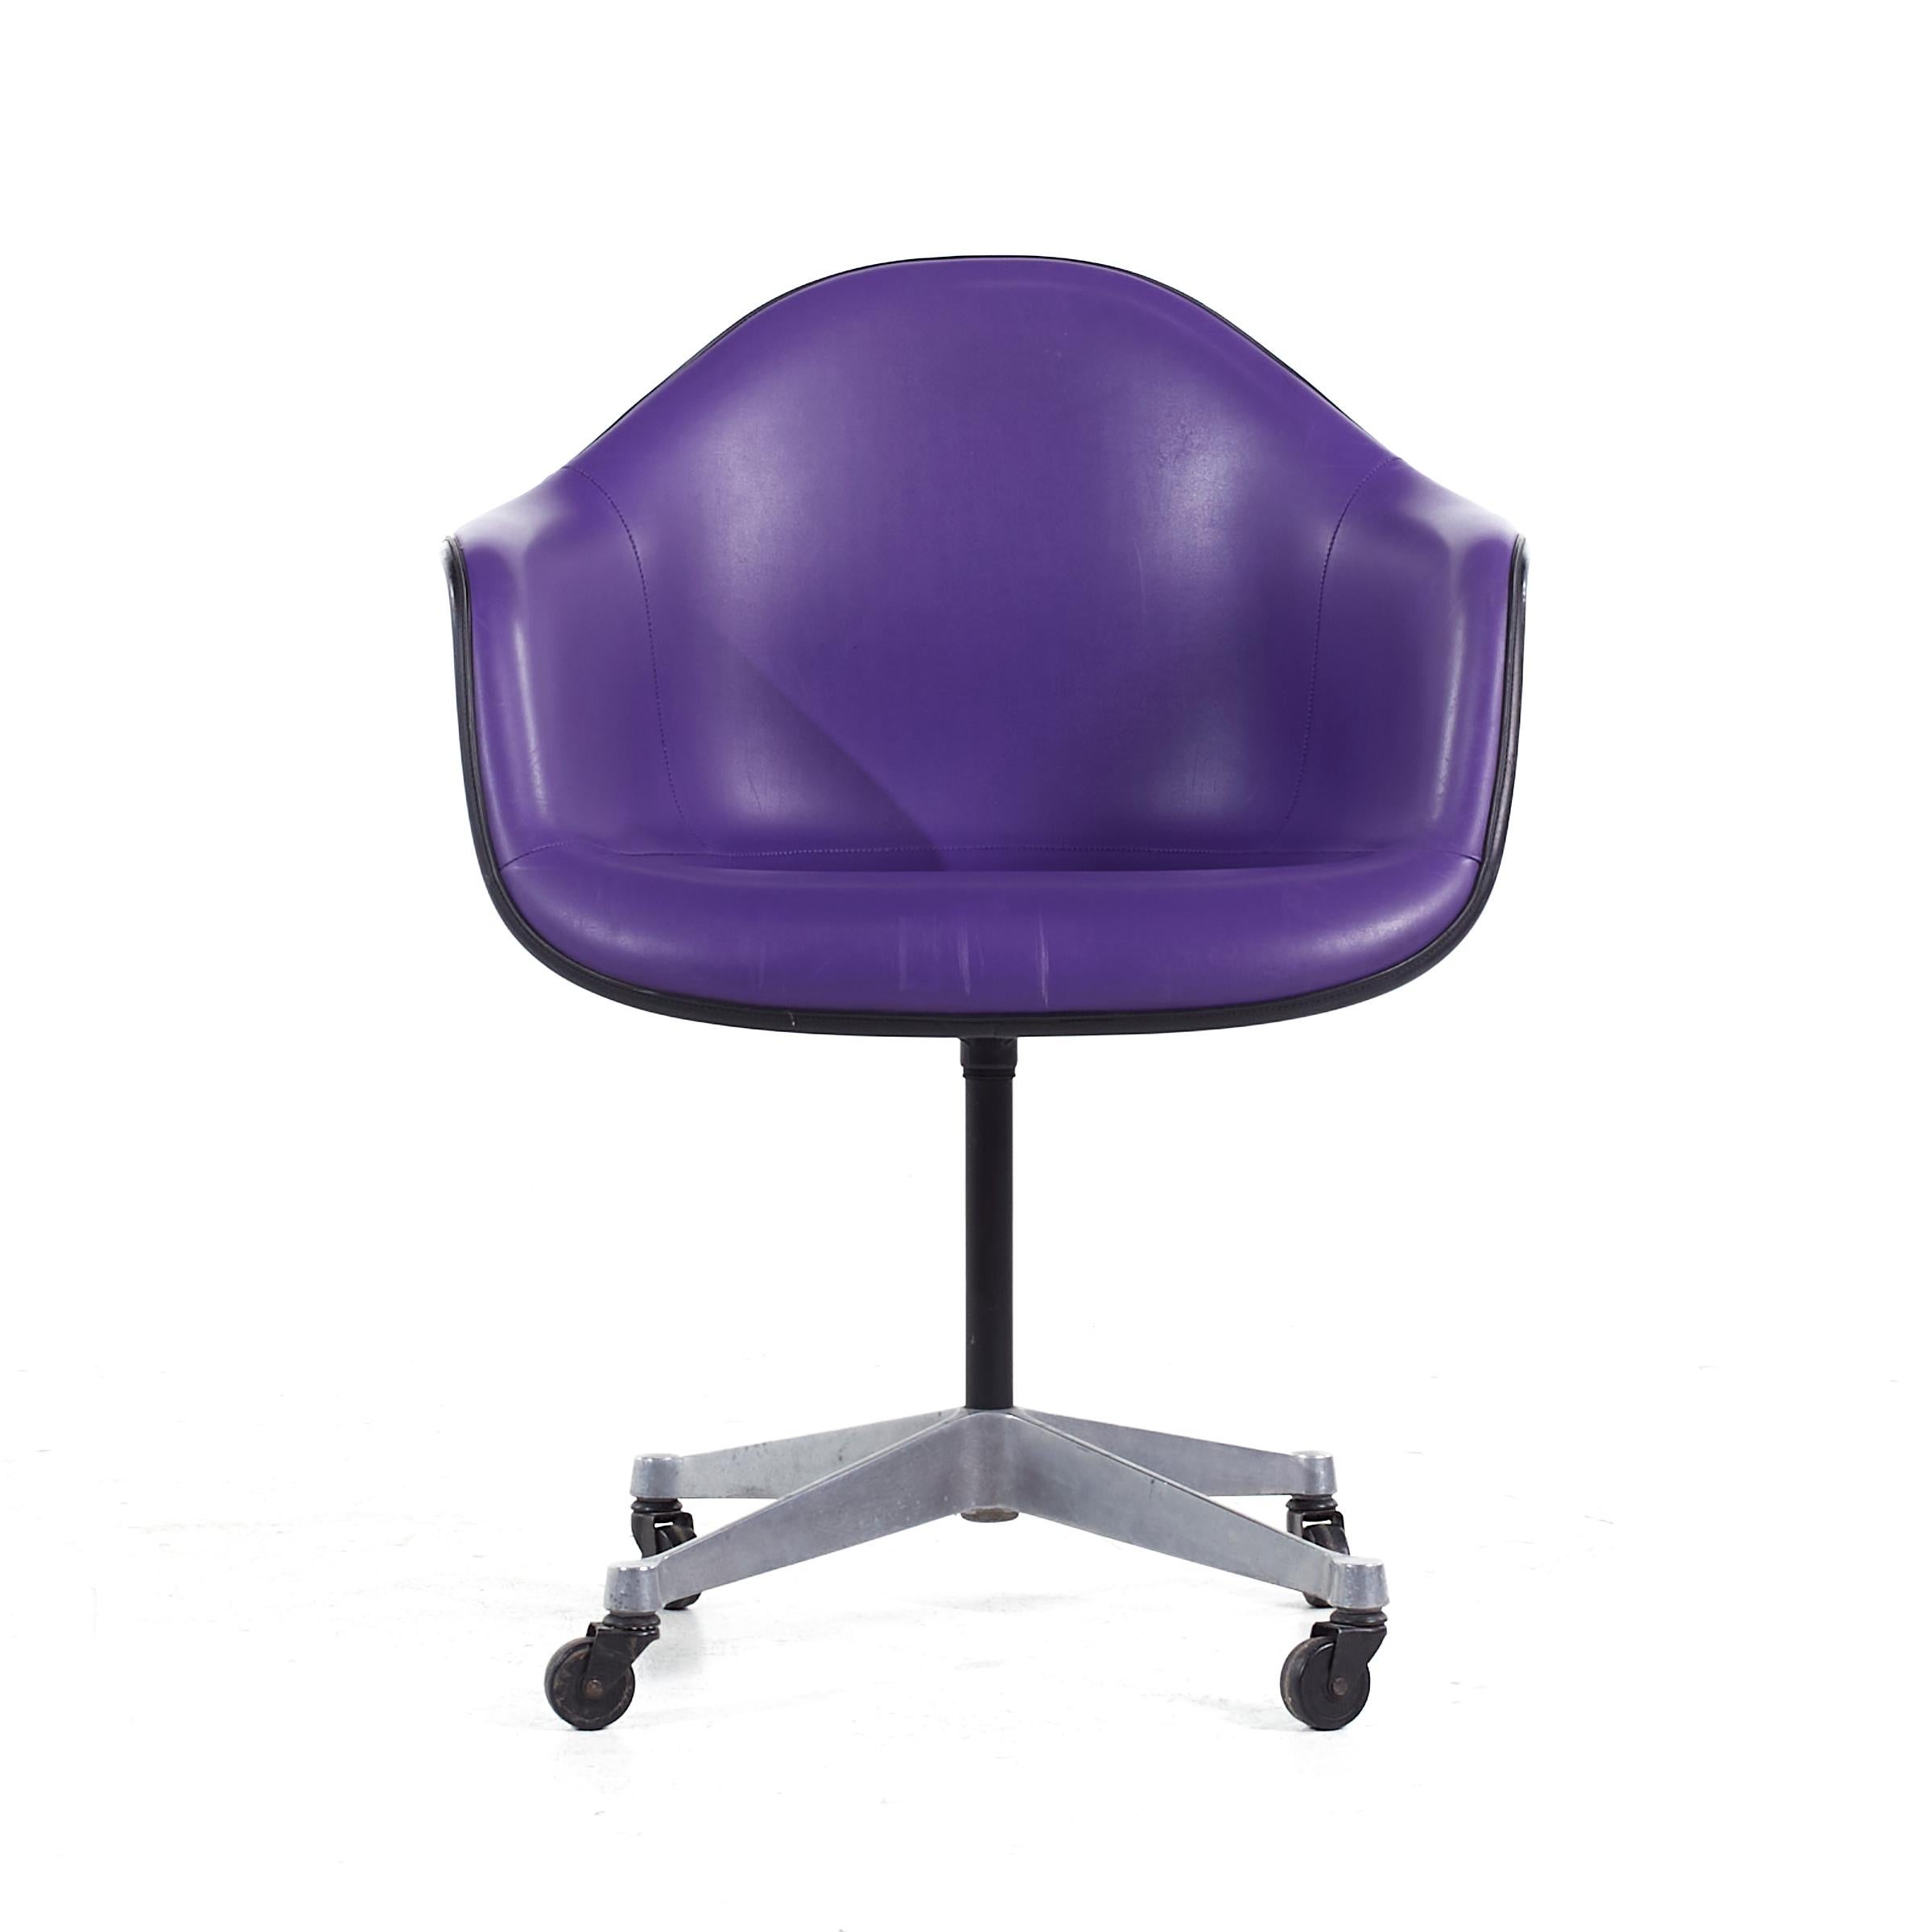 Eames for Herman Miller Mid Century Purple Padded Fiberglass Swivel Office Chair

This office chair measures: 25.5 wide x 24 deep x 32.75 high, with a seat height of 18.5 and arm height/chair clearance 26 inches

All pieces of furniture can be had